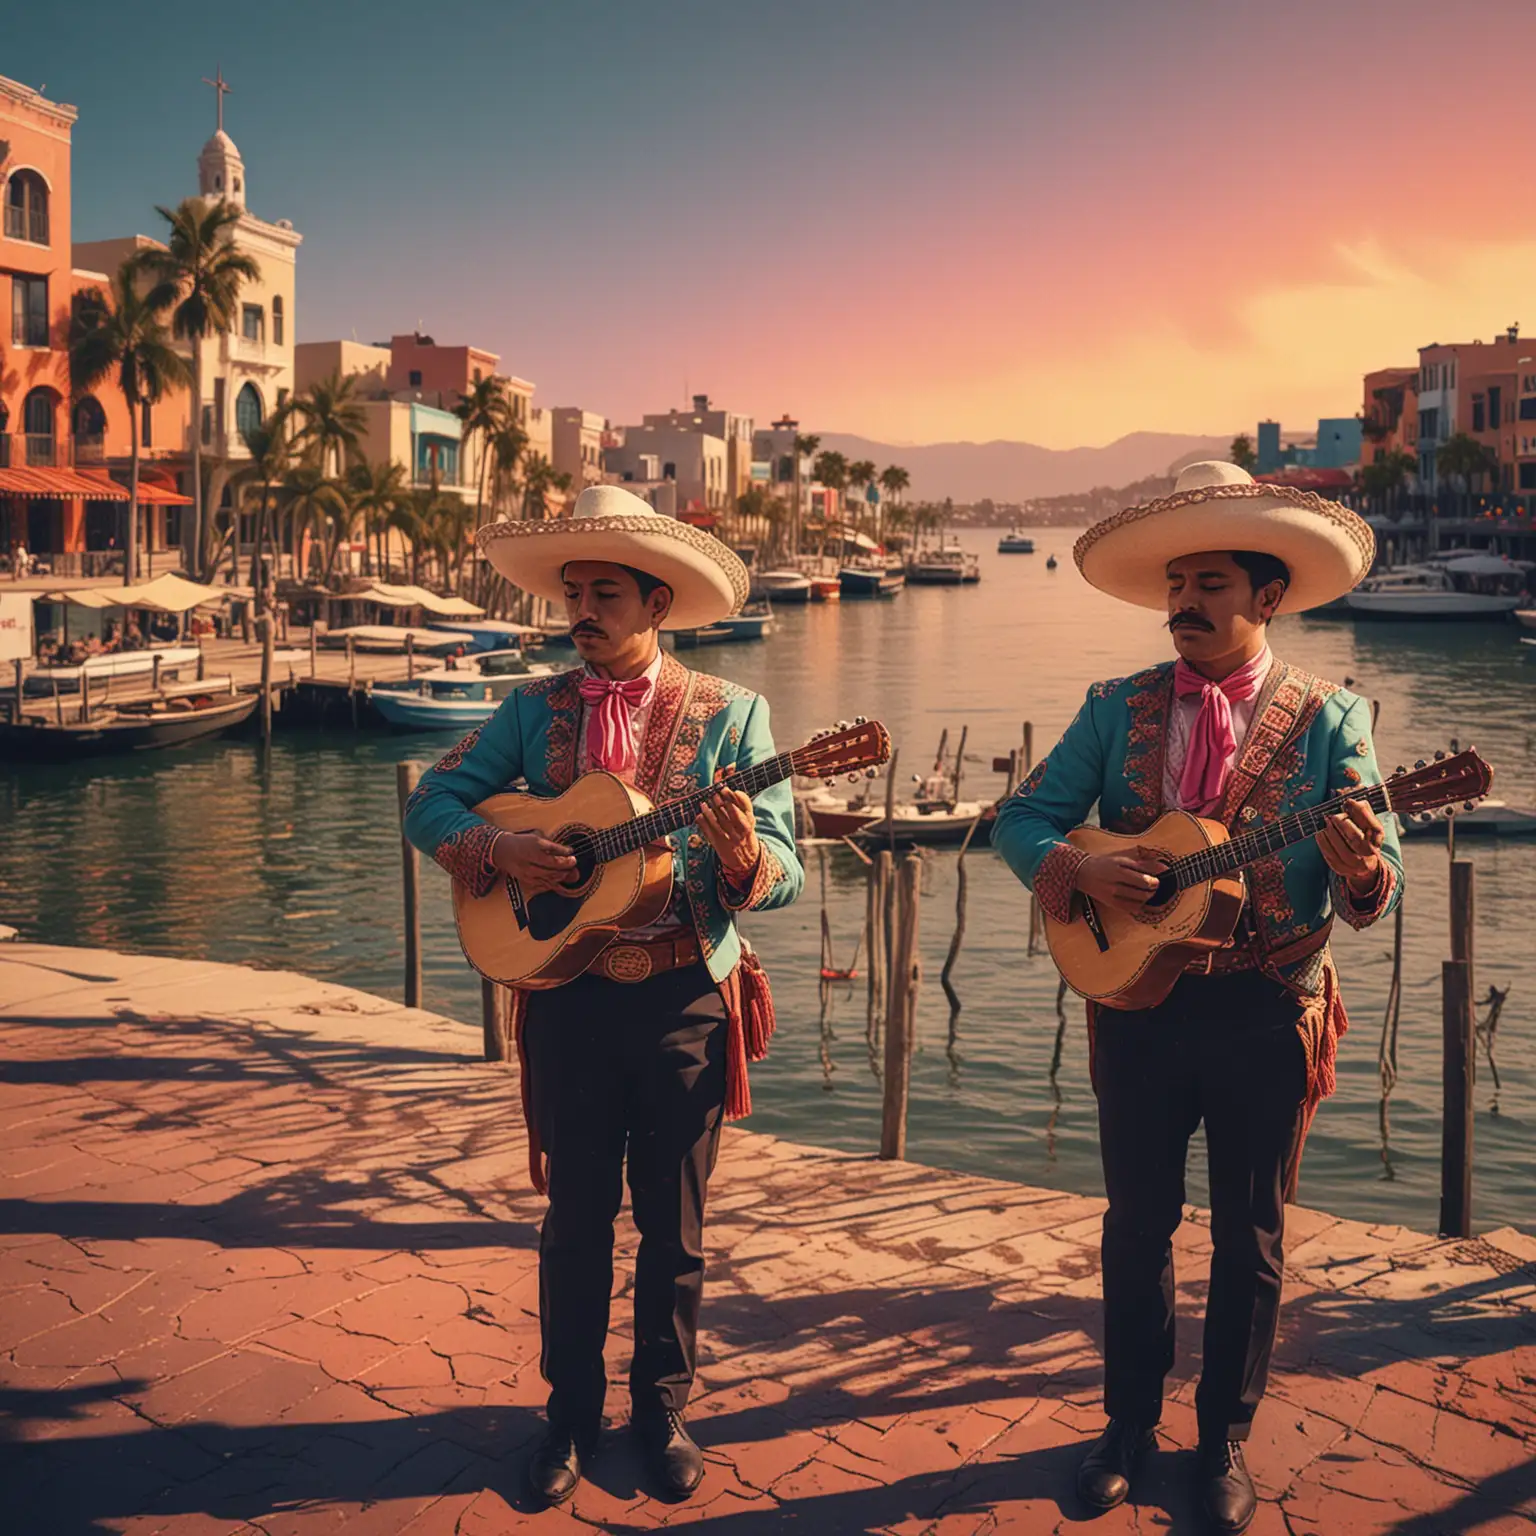 mariachi vibes by the waterfront, stylized, smeared colors, as if on a pleasant LSD trip